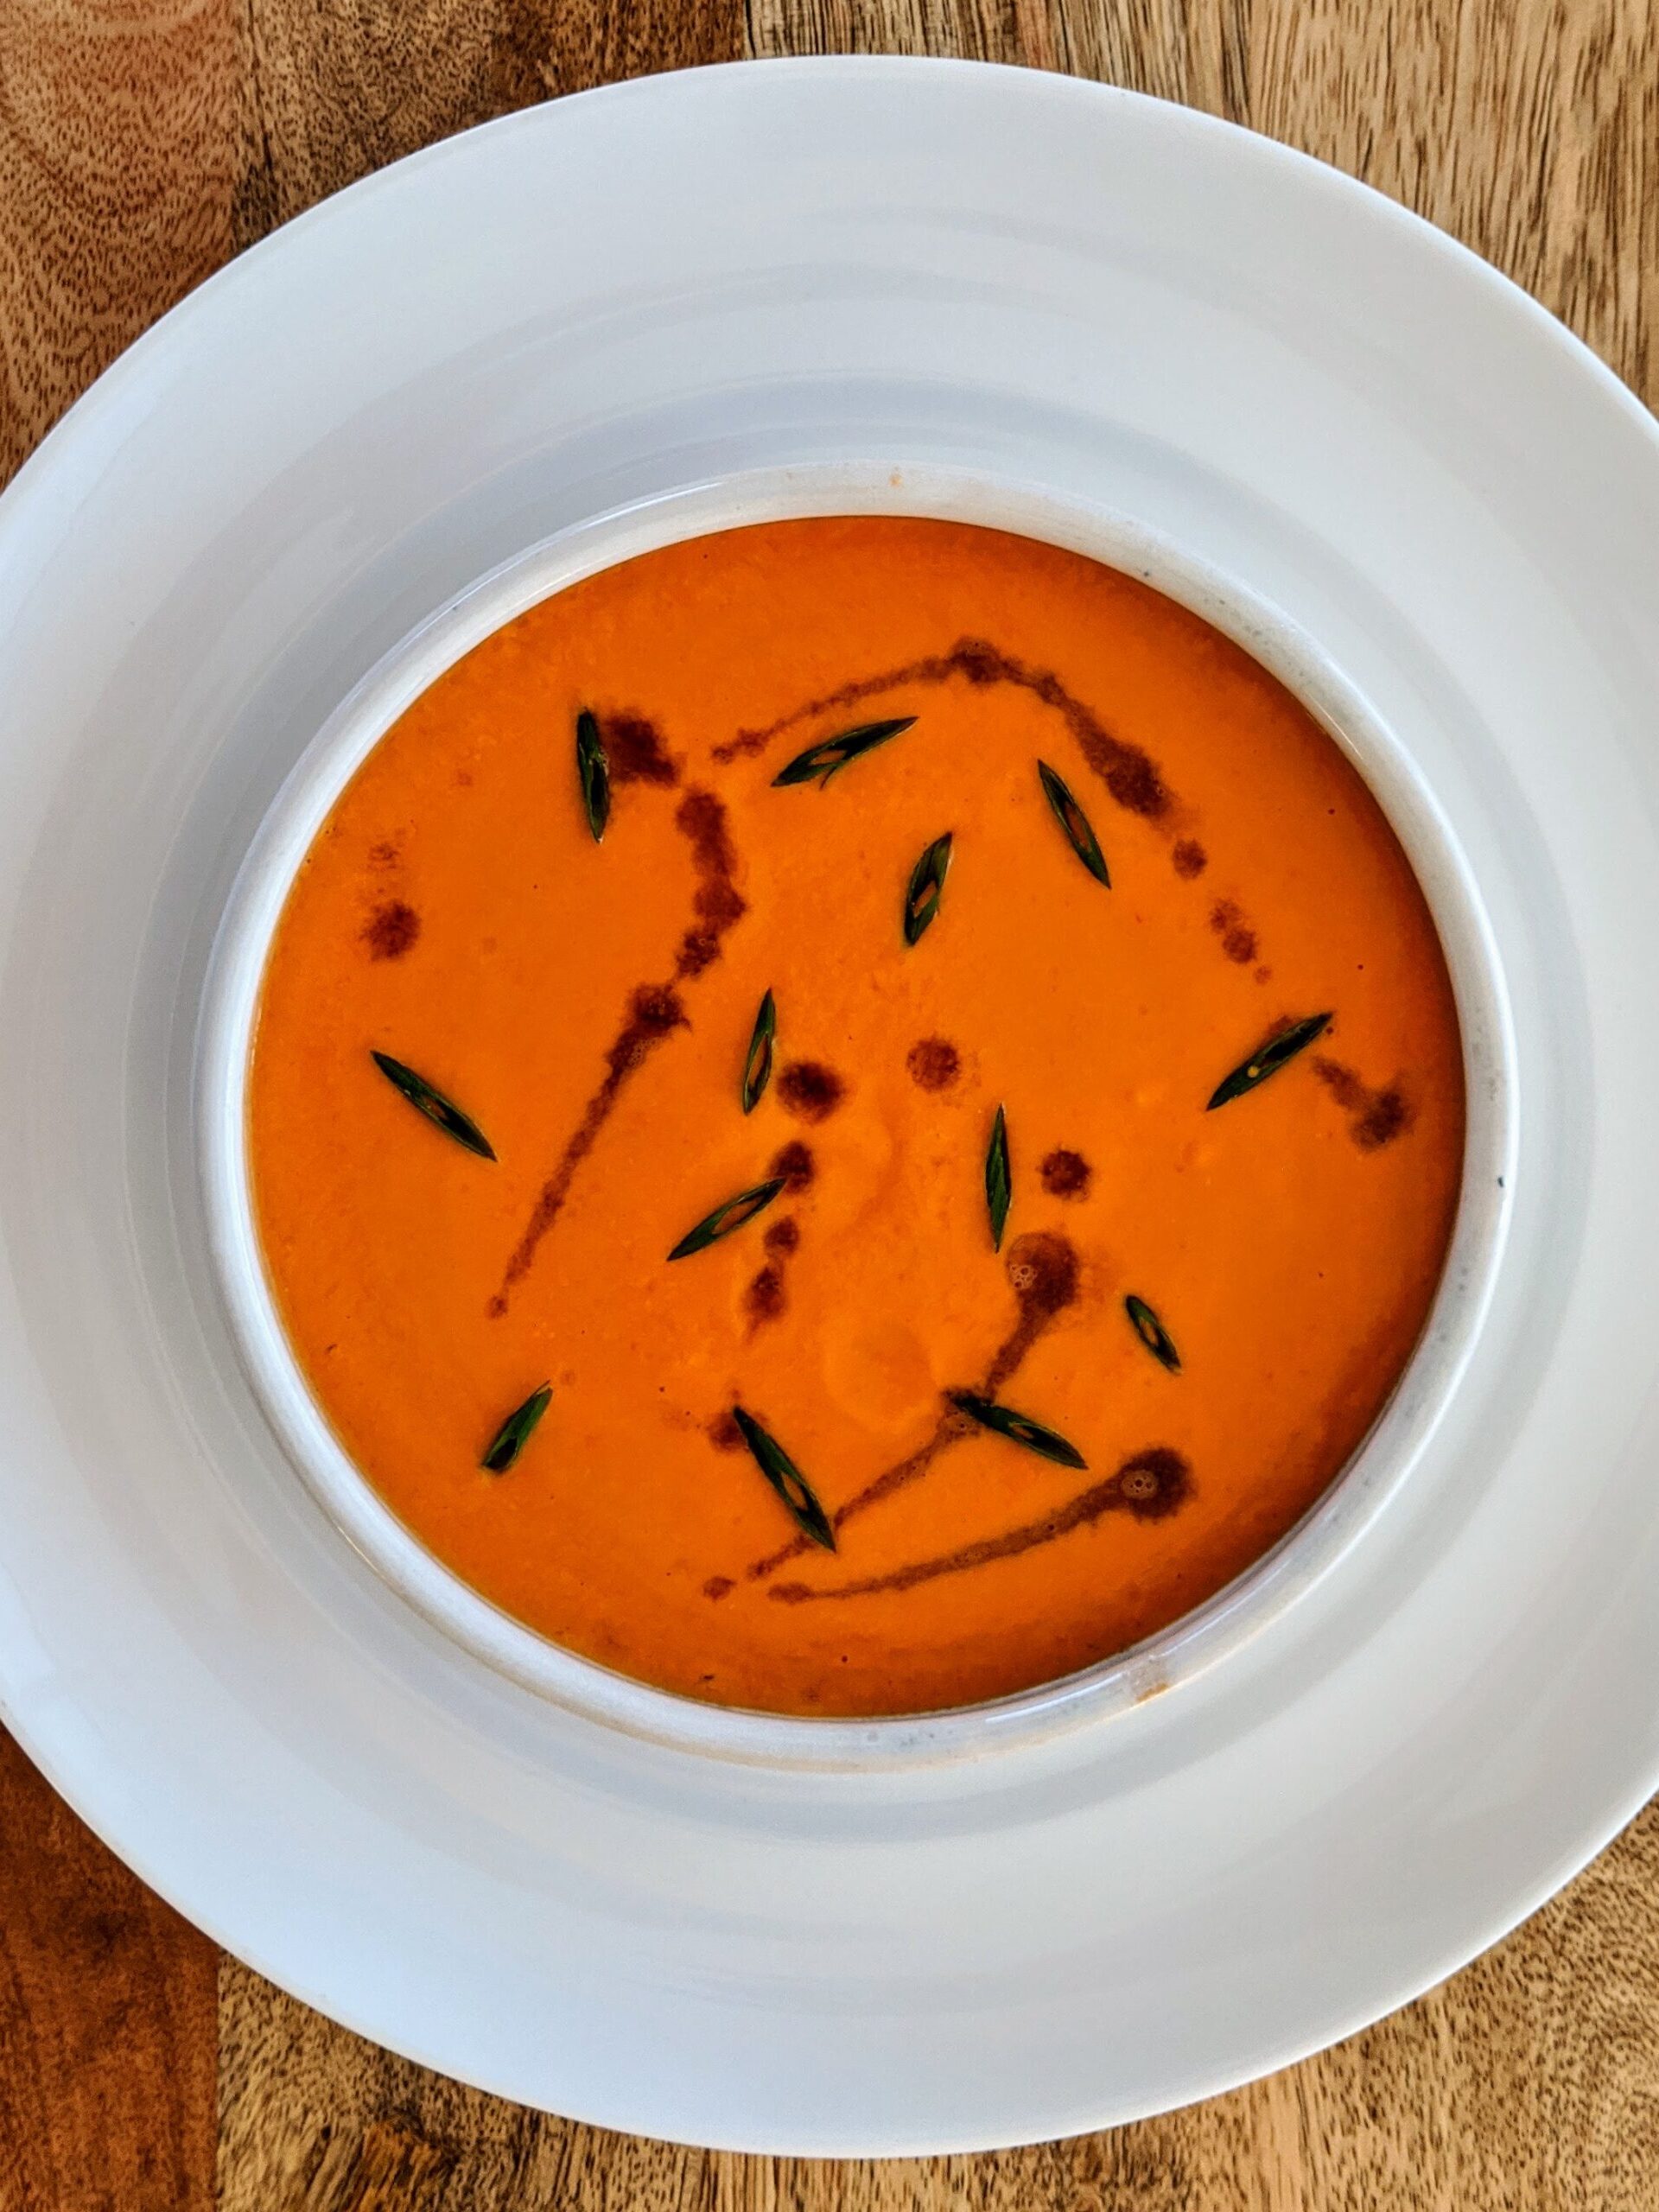 A small bowl of vibrant orange Andalusian Gazpacho; garnished with sliced chives and a drizzle of sherry vinegar.